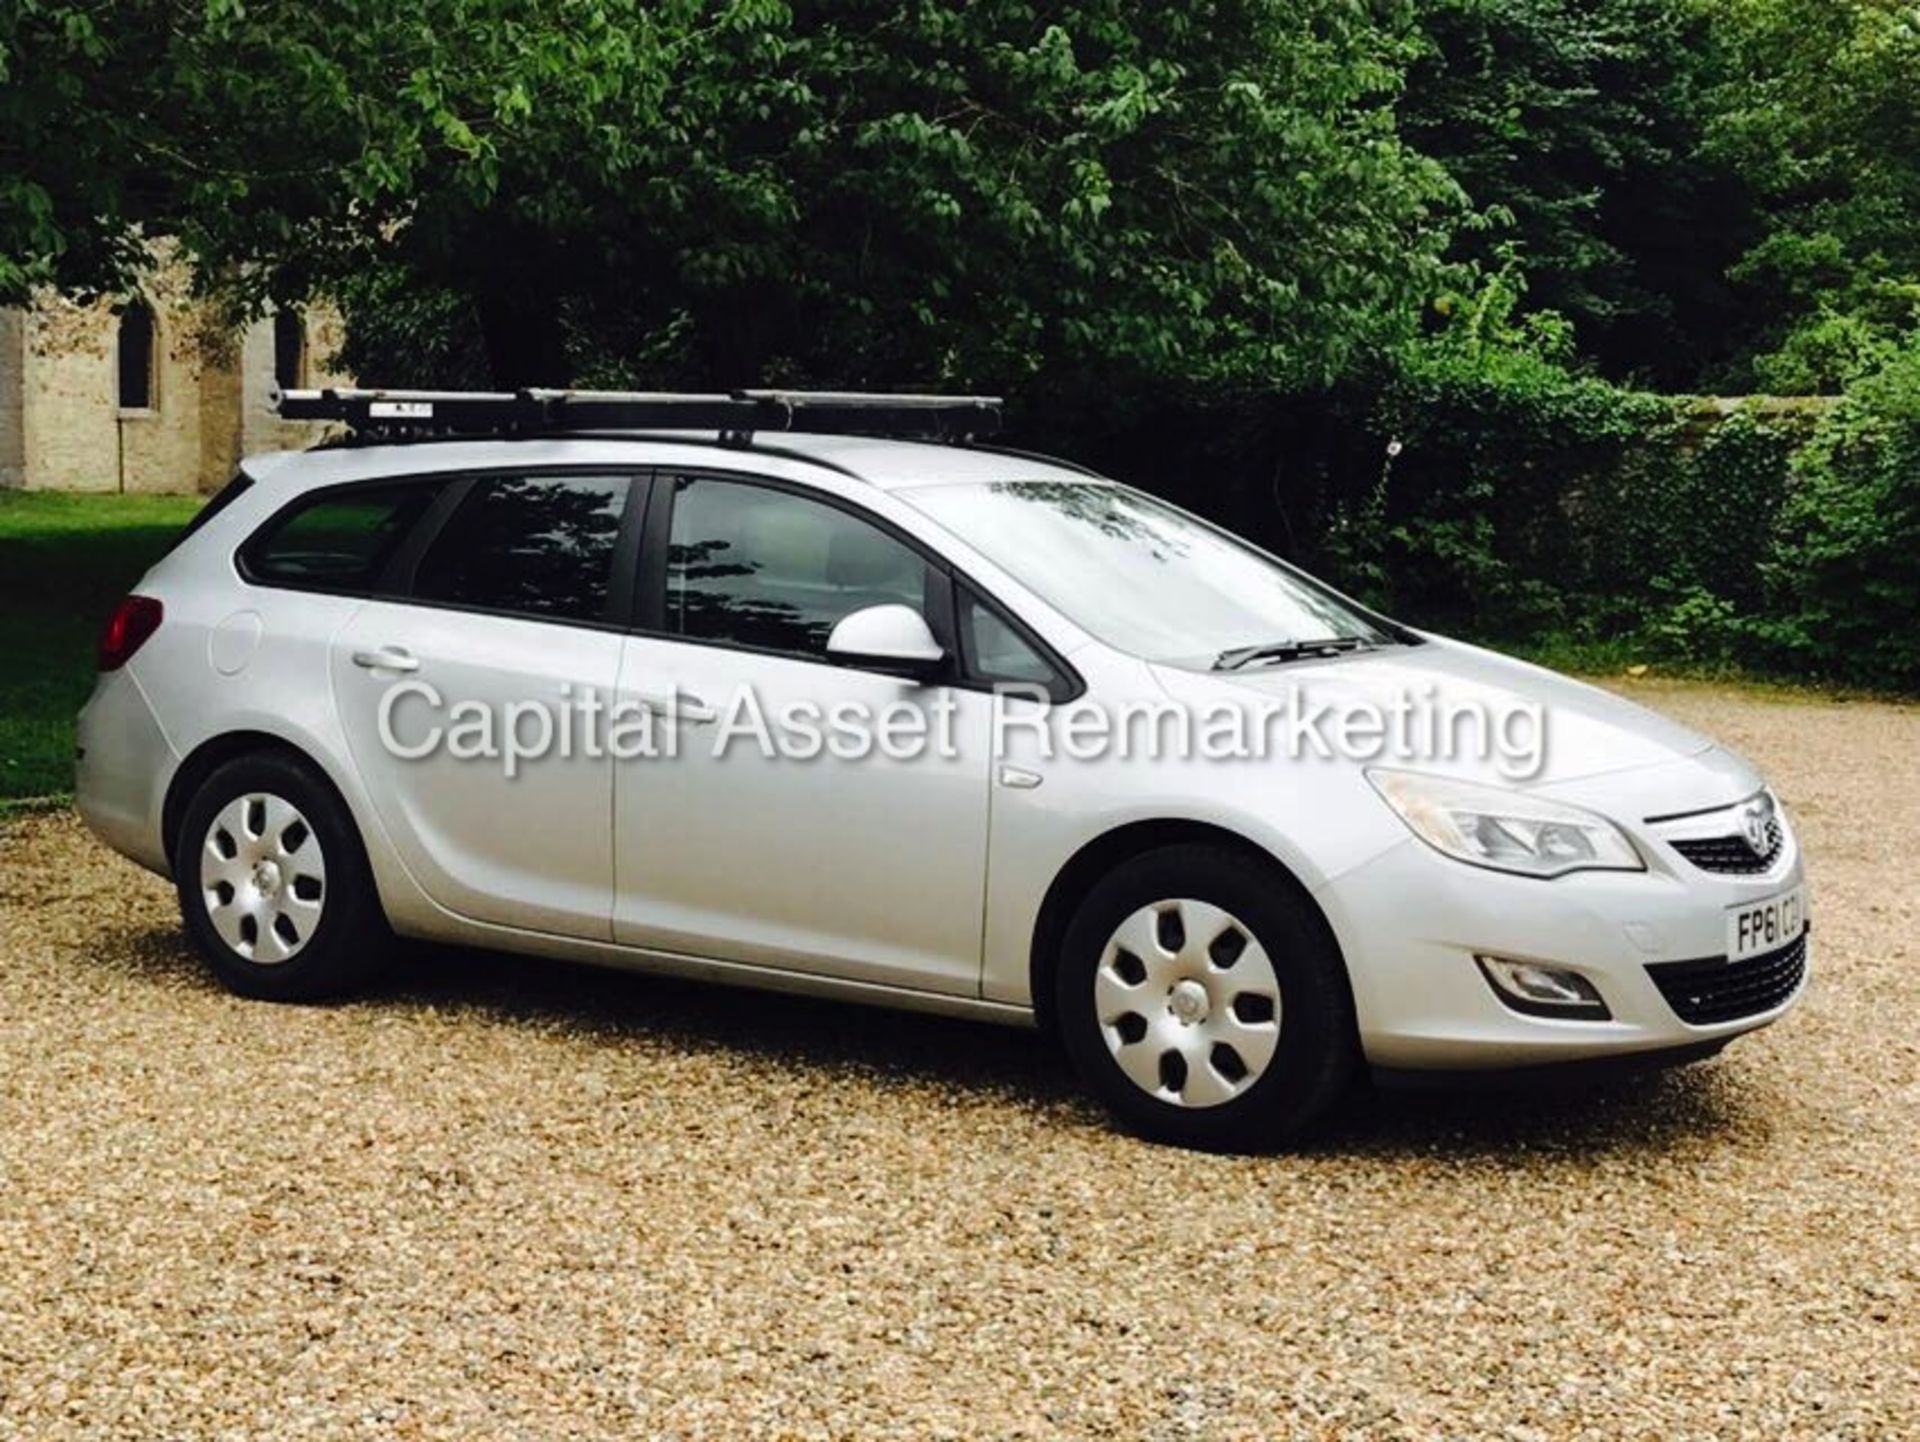 (ON SALE) VAUXHALL ASTRA 'EXCLUSIVE' (2012 MODEL) '1.7 CDTI - ECOFLEX - 6 SPEED' *AIR CON* (1 OWNER)